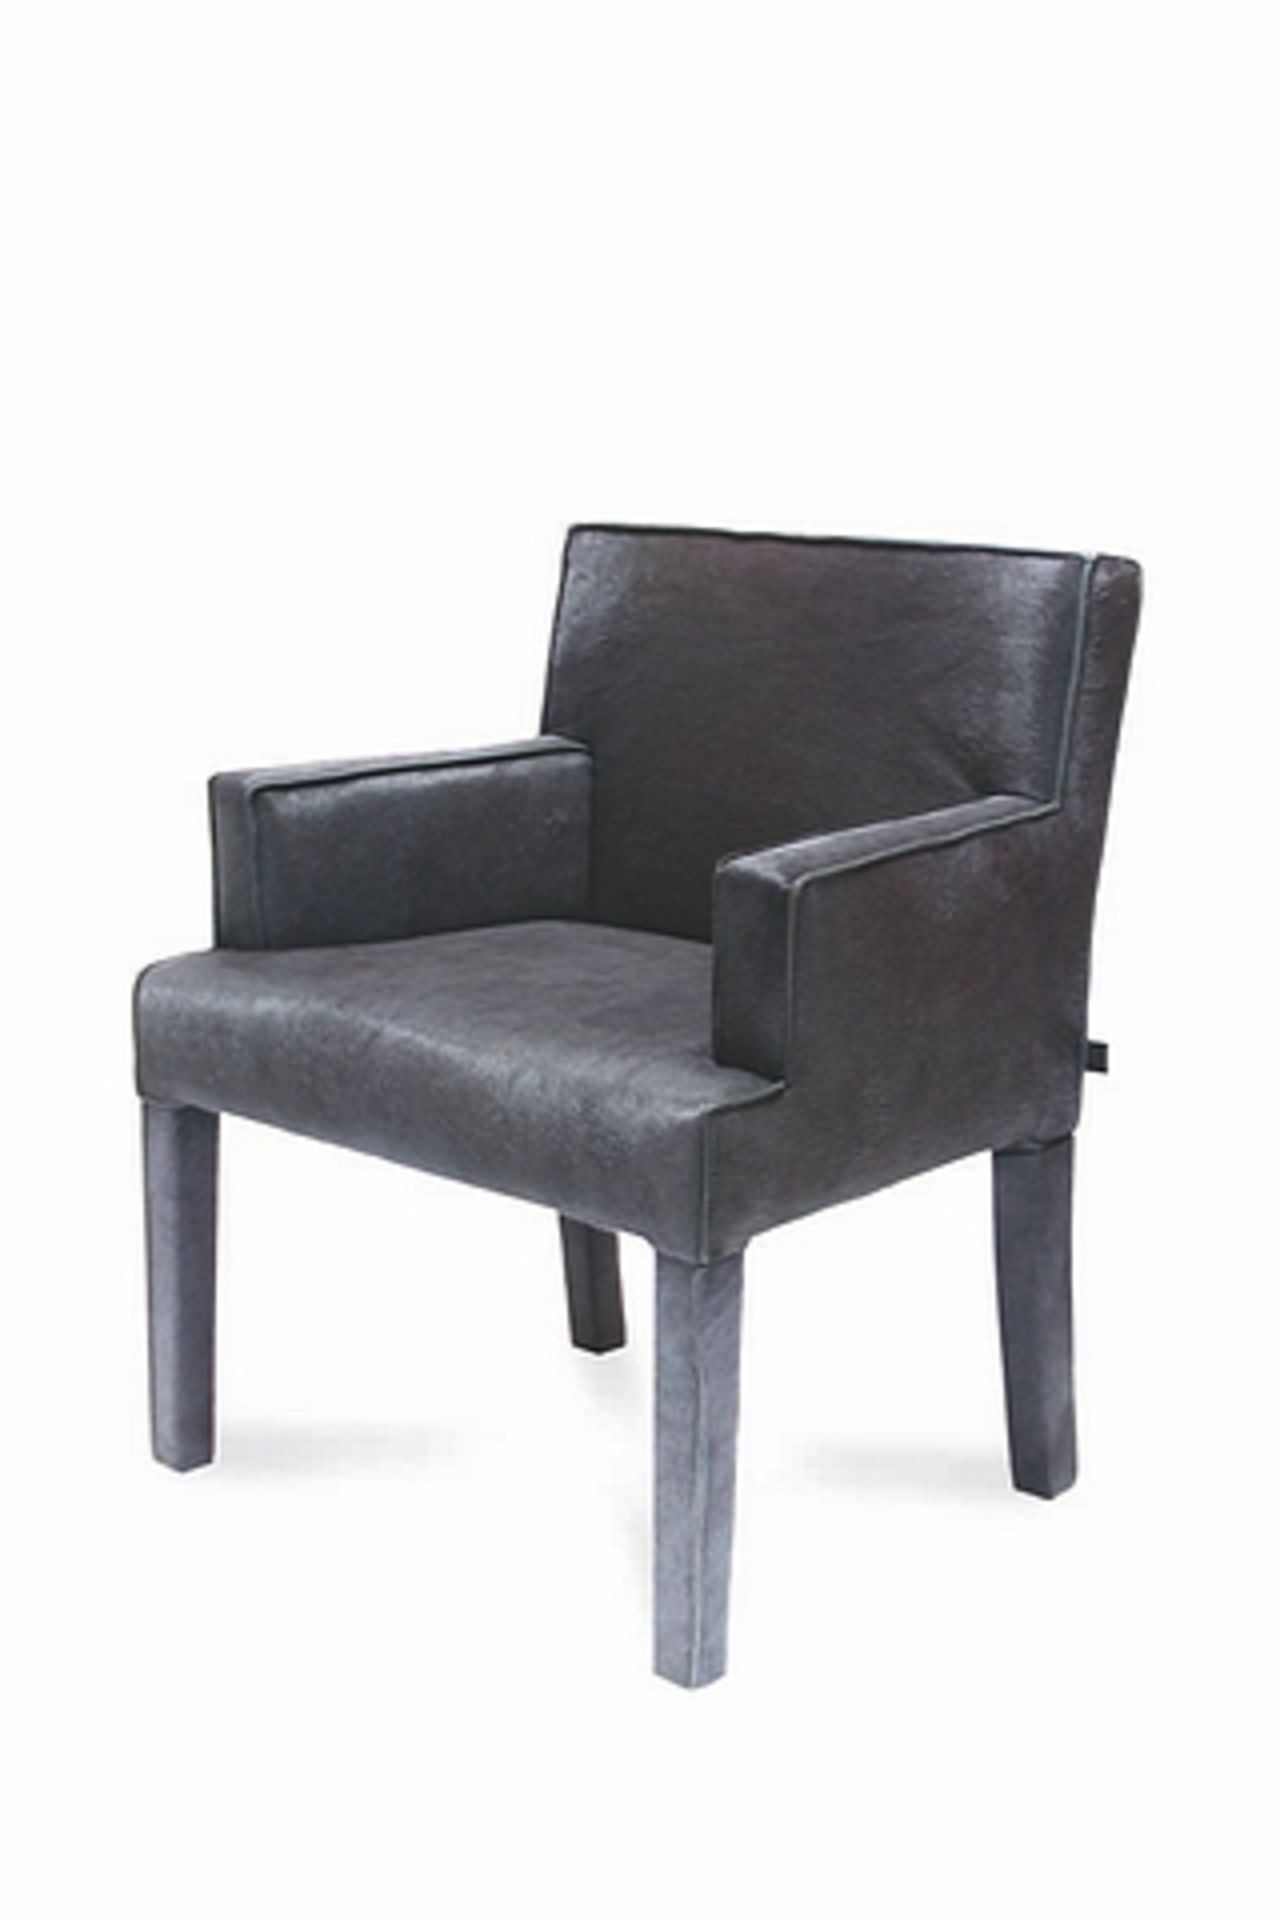 Chair stockholm hairy grey cow hide dn245 hairy grey. Supmtuously soft with a velveteen sheen,